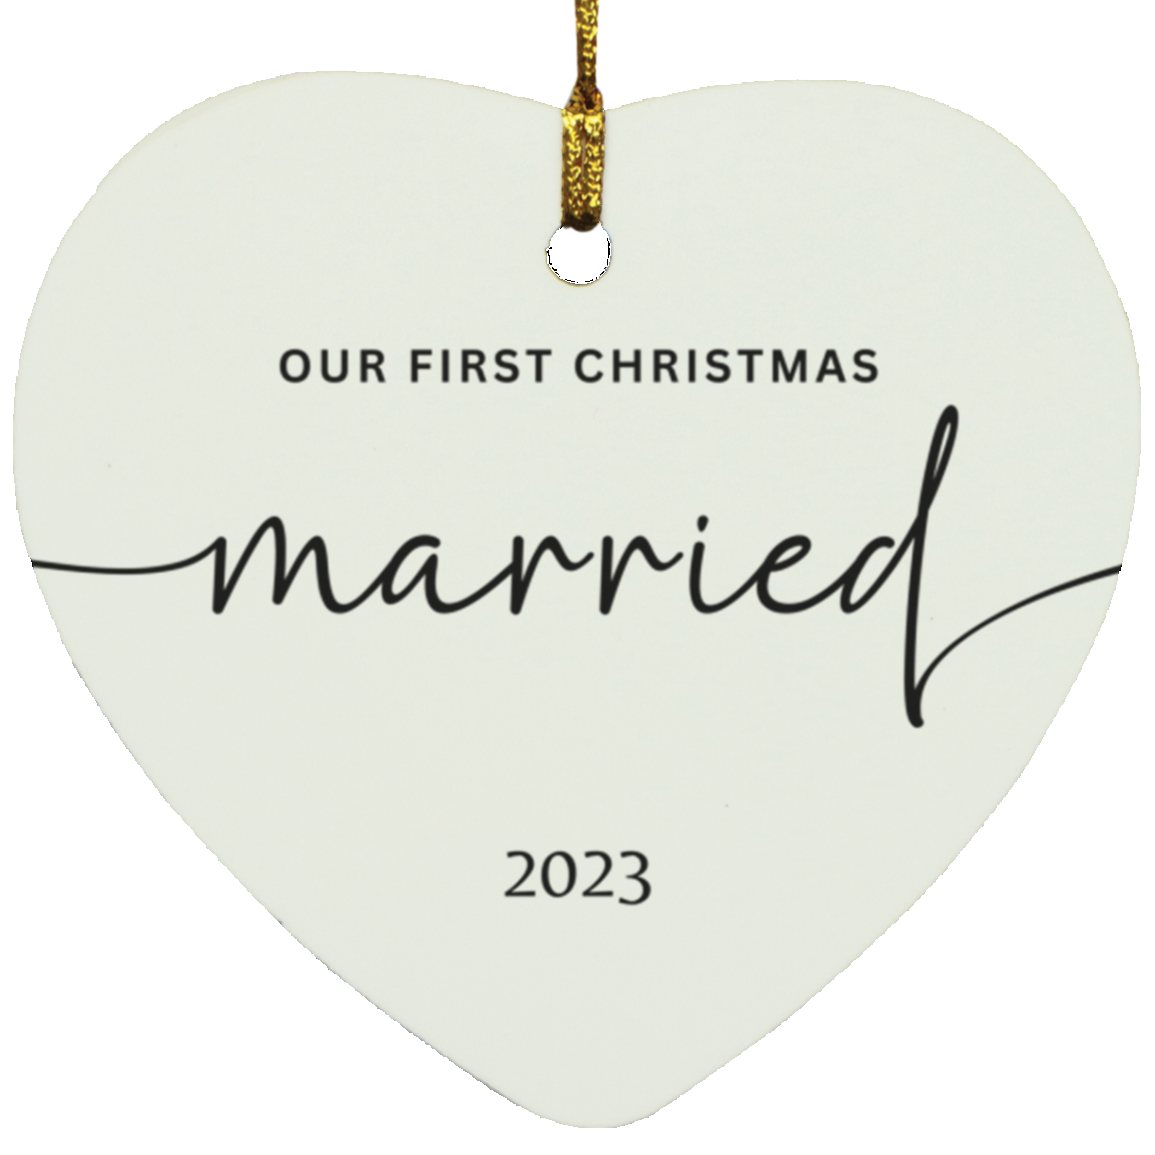 Our First Christmas Married (2023)- Wooden Circle and Heart Ornaments